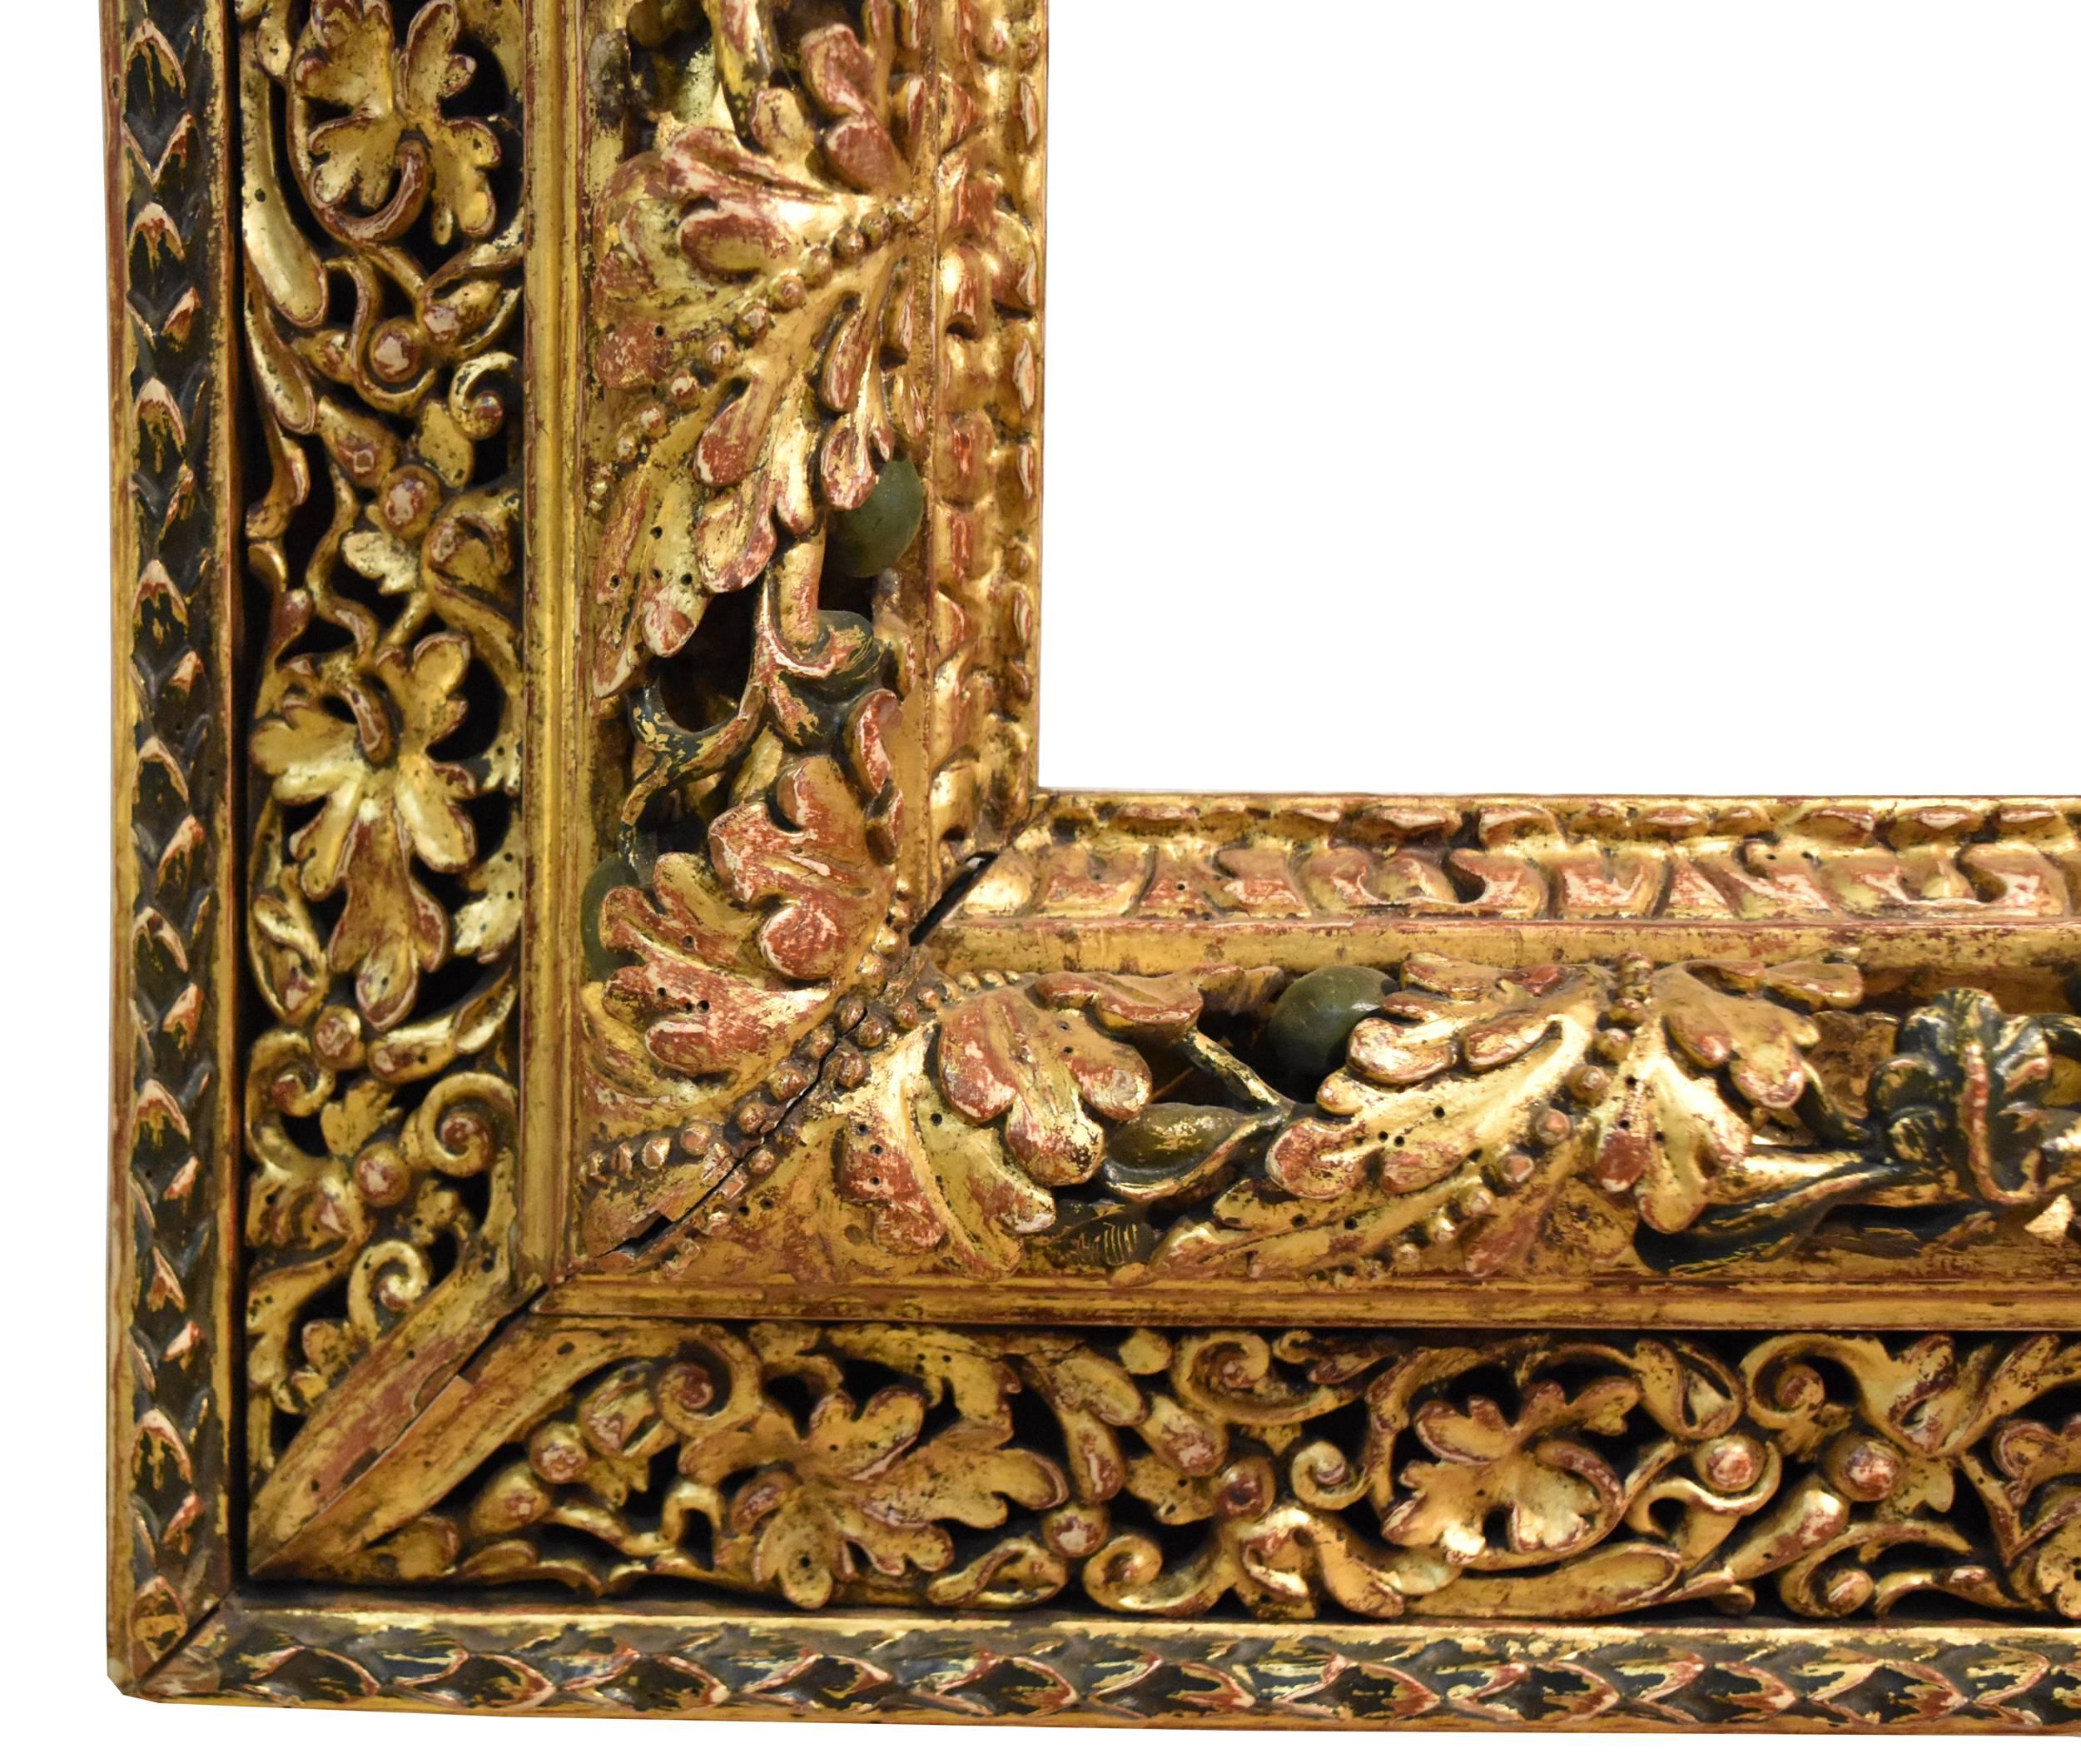 Early 19th century Spanish gold gilded and green hand carved wooden frame of exceptional quality due to being densely decorated with minuscule vegetable motifs.

External dimensions: 100 x 80cm
Interior dimensions: 78 x 57cm.